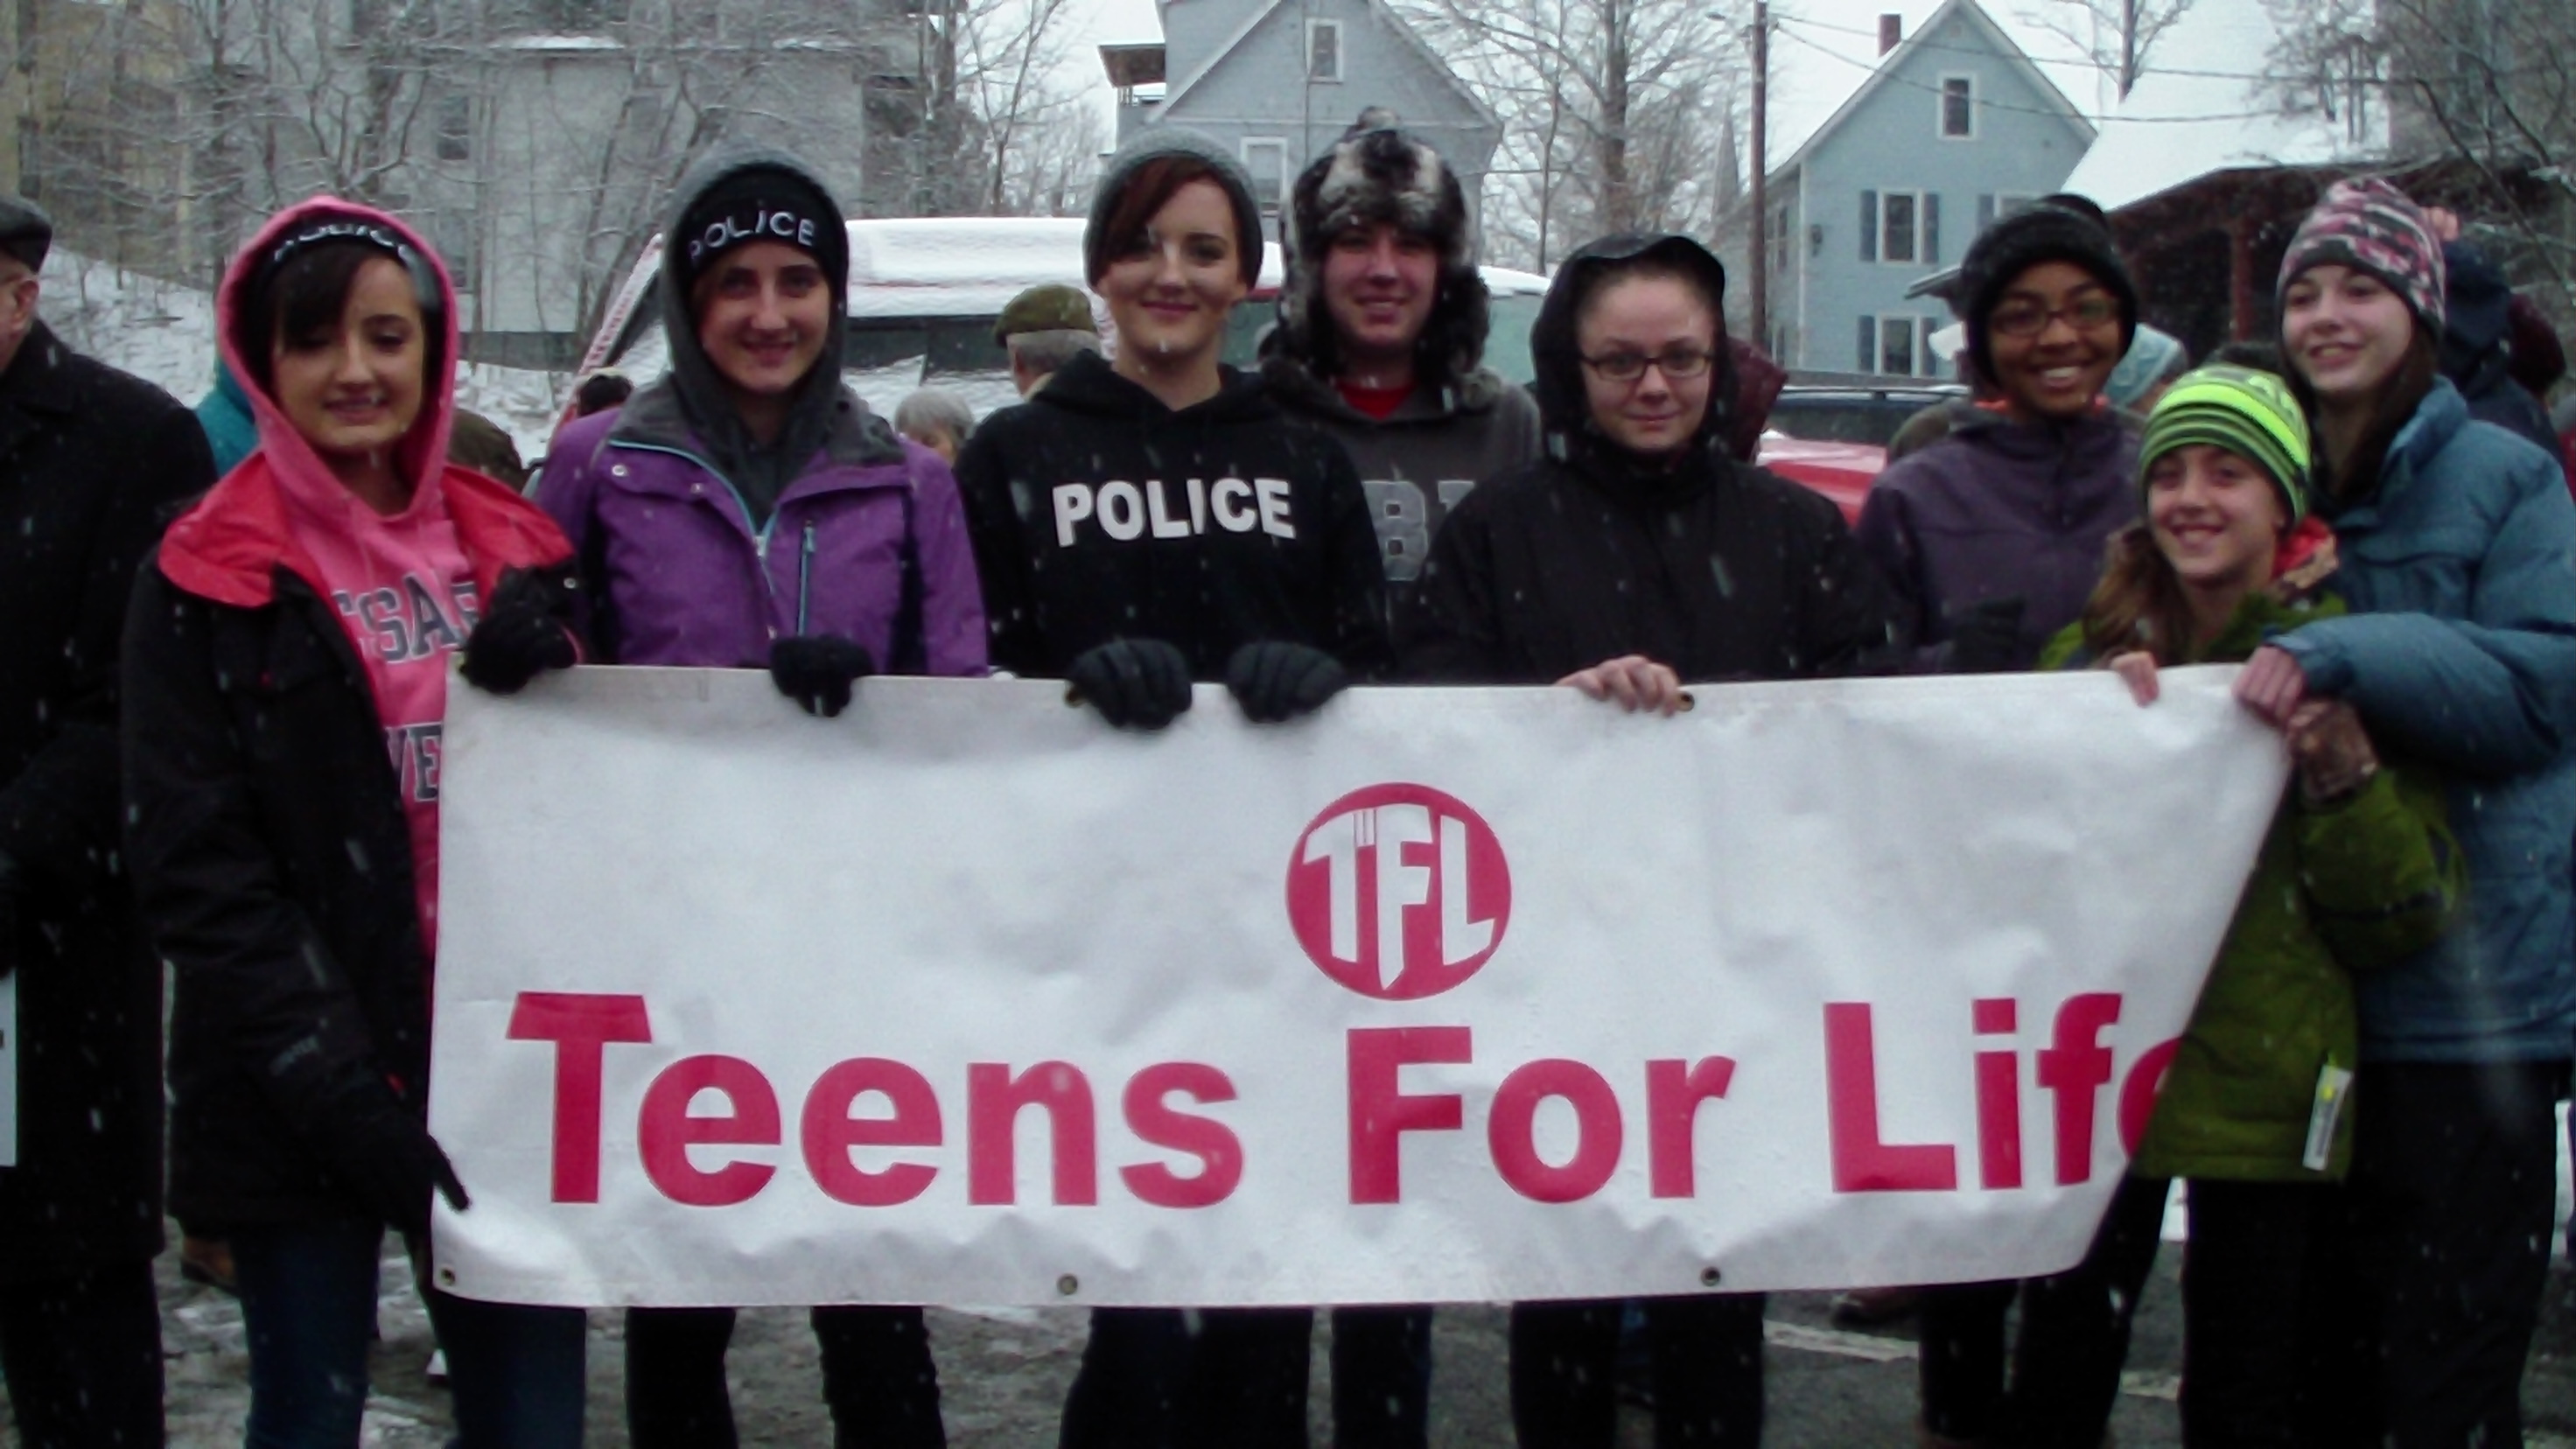 St. Paul's 7th grader Maeve joined with local teens for life in Montpelier March for Life.